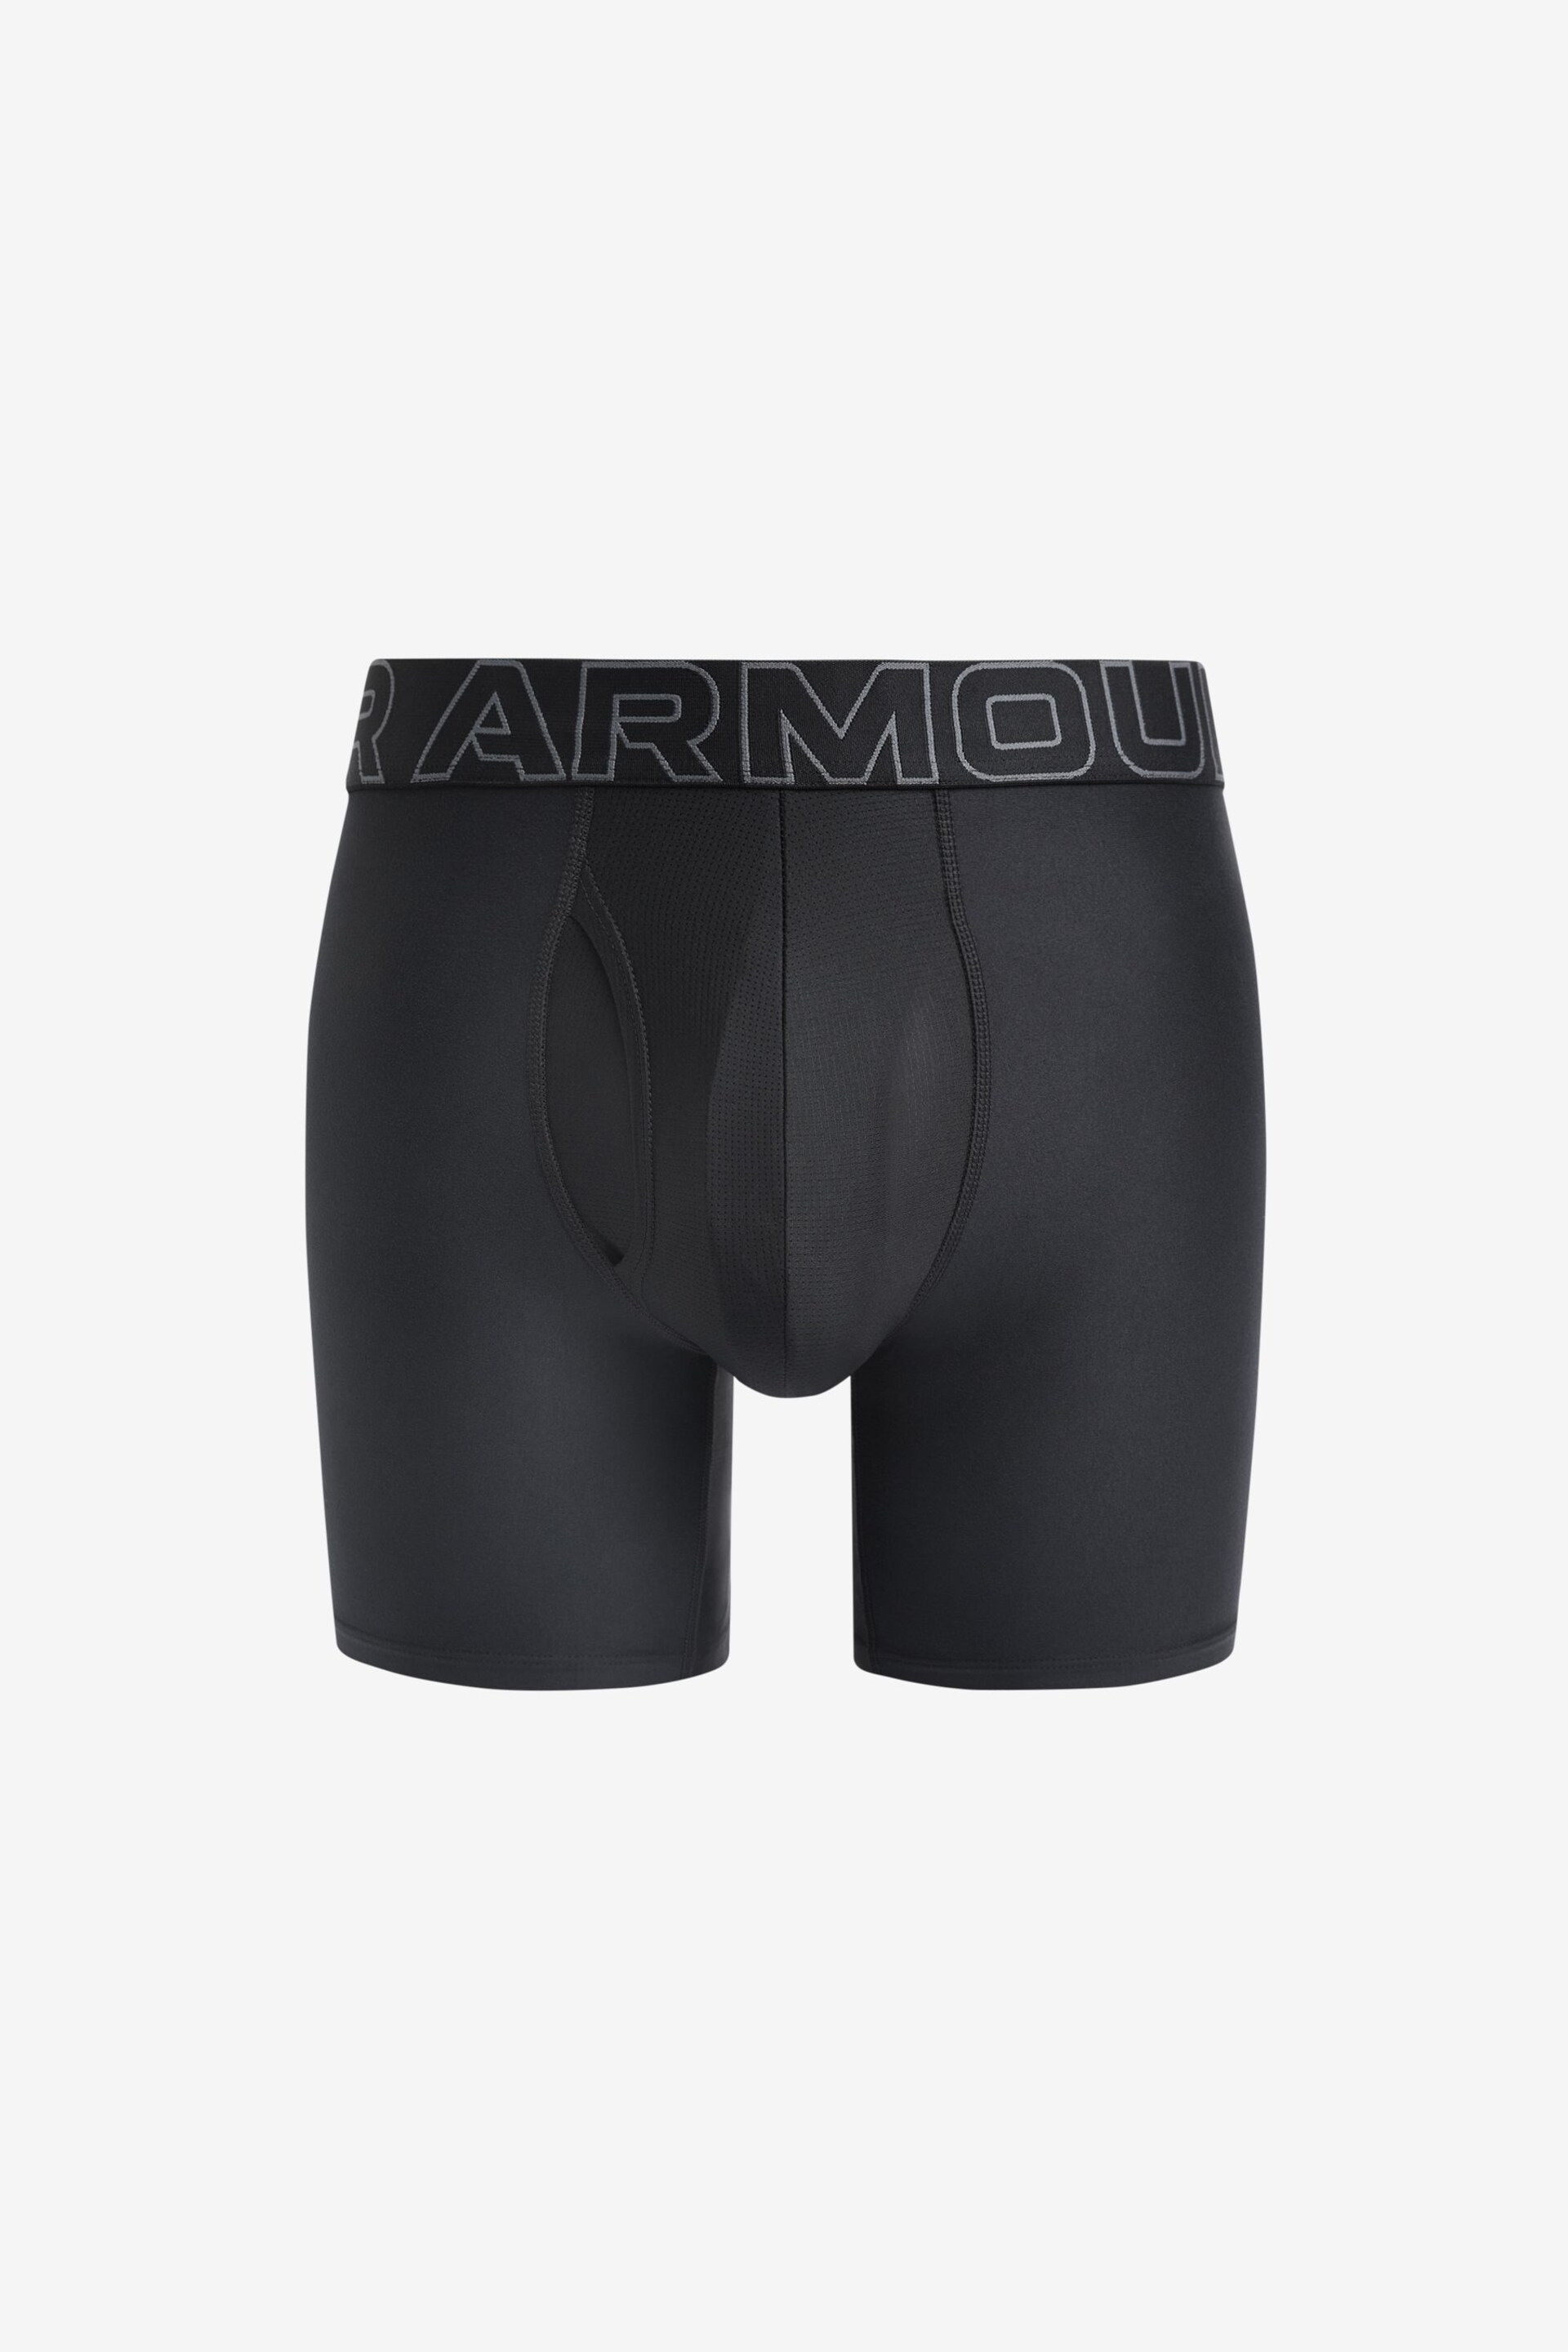 Under Armour Black Performance Tech Boxers 3 Pack - Image 3 of 6